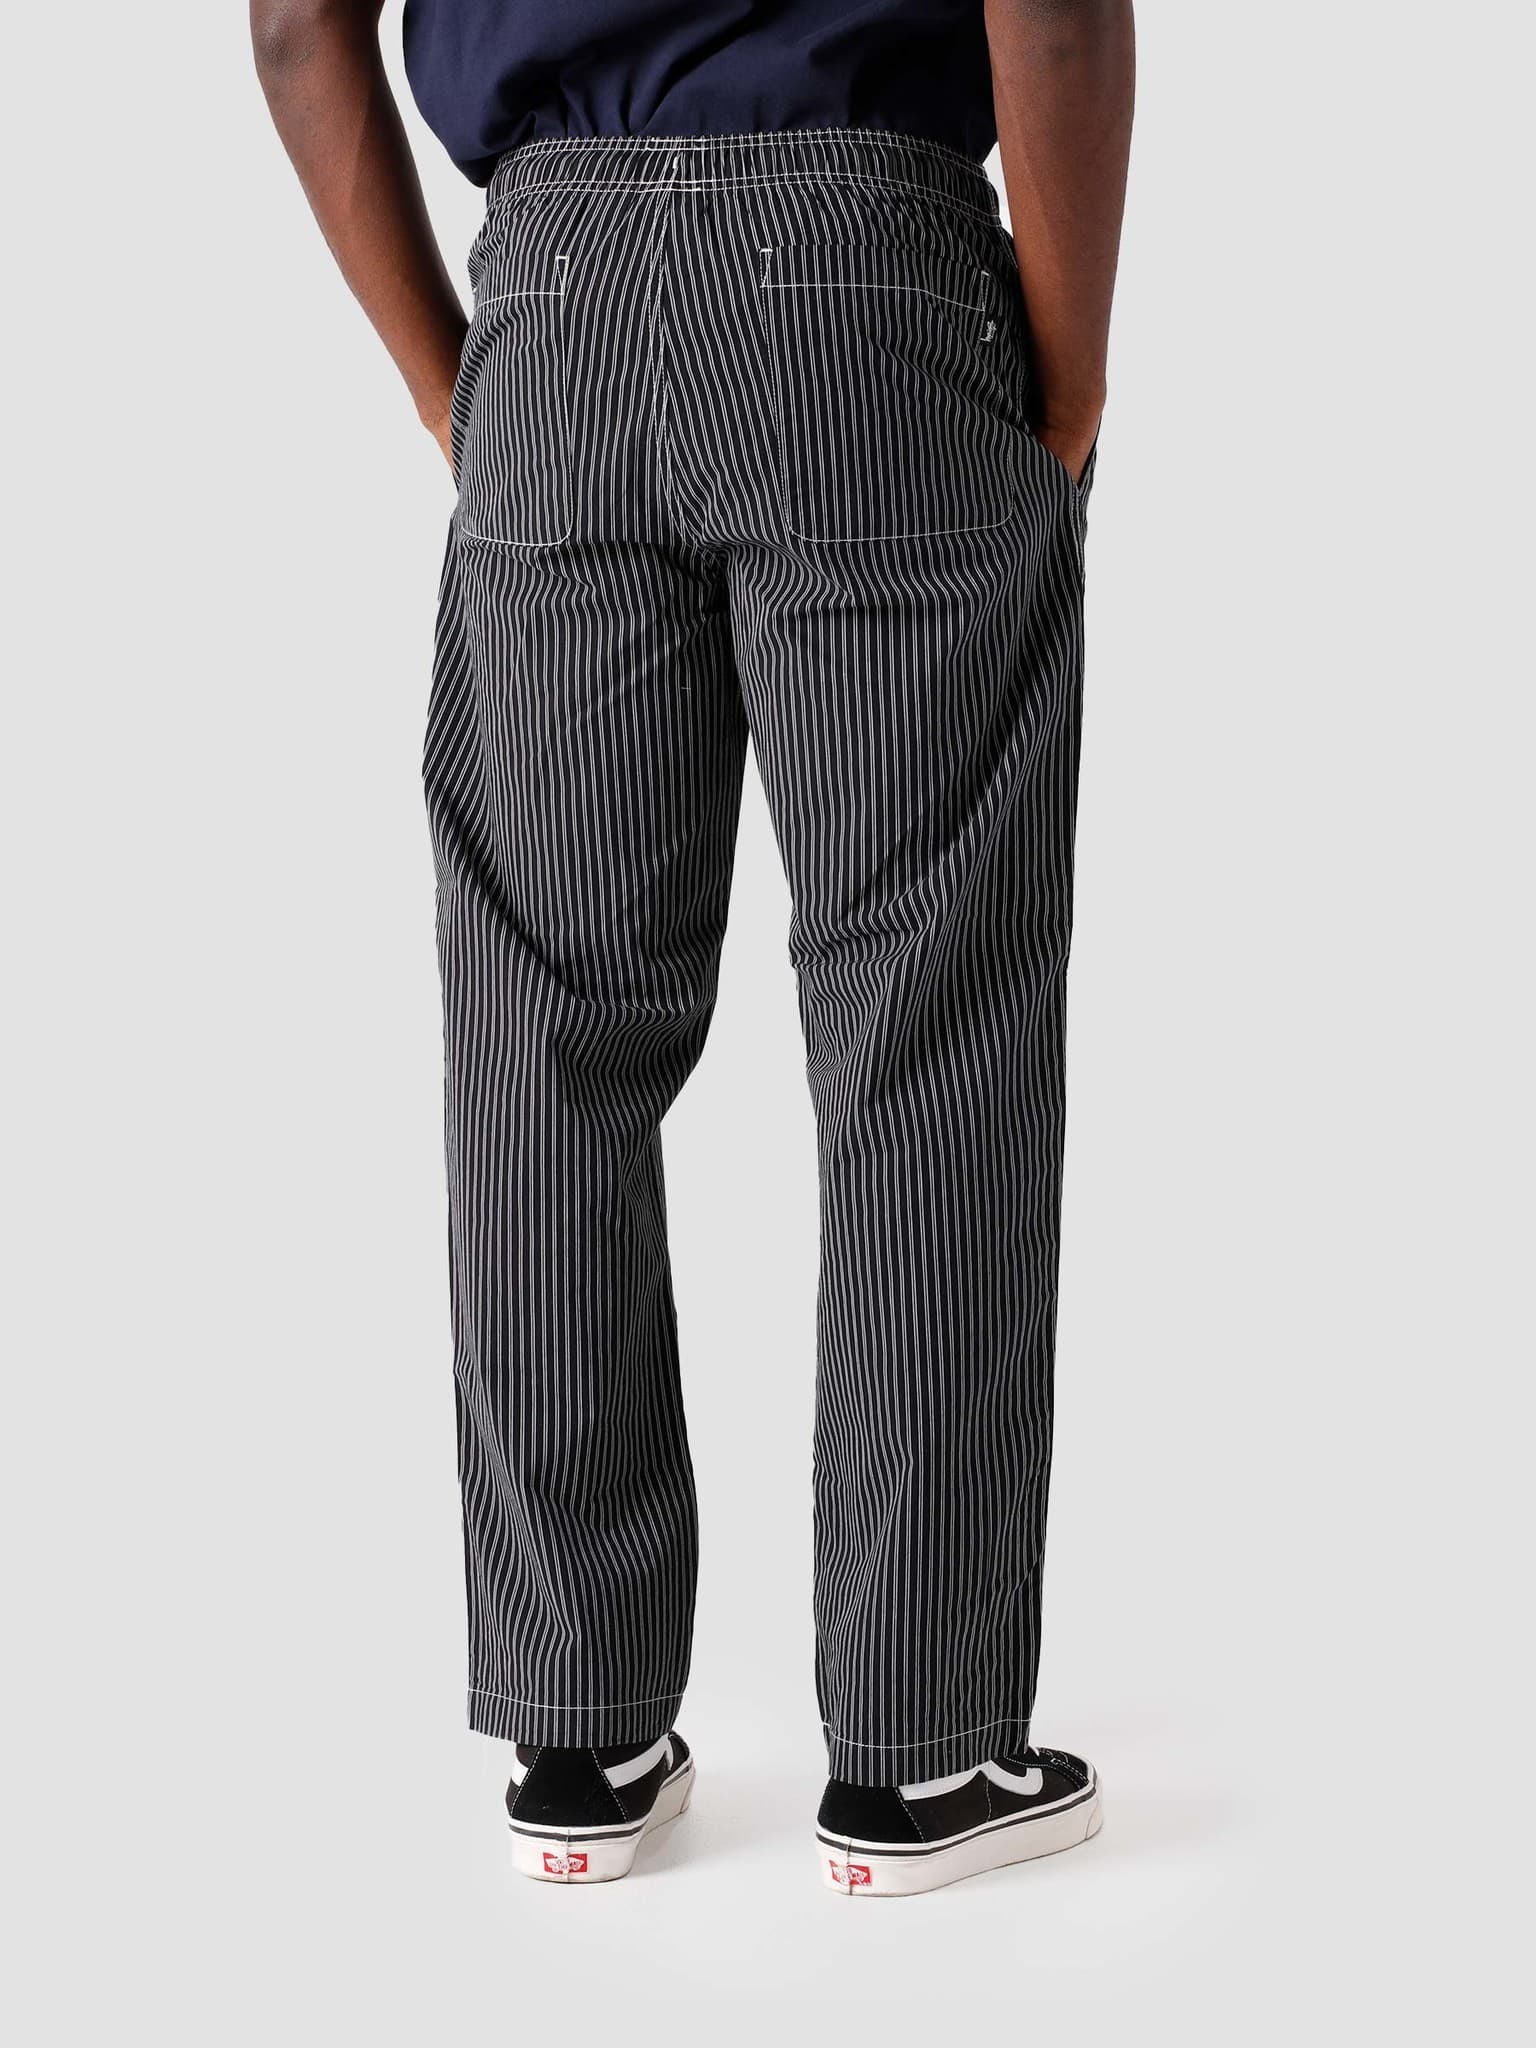 Brushed Cotton Relaxed Pant Stripe 116473-922